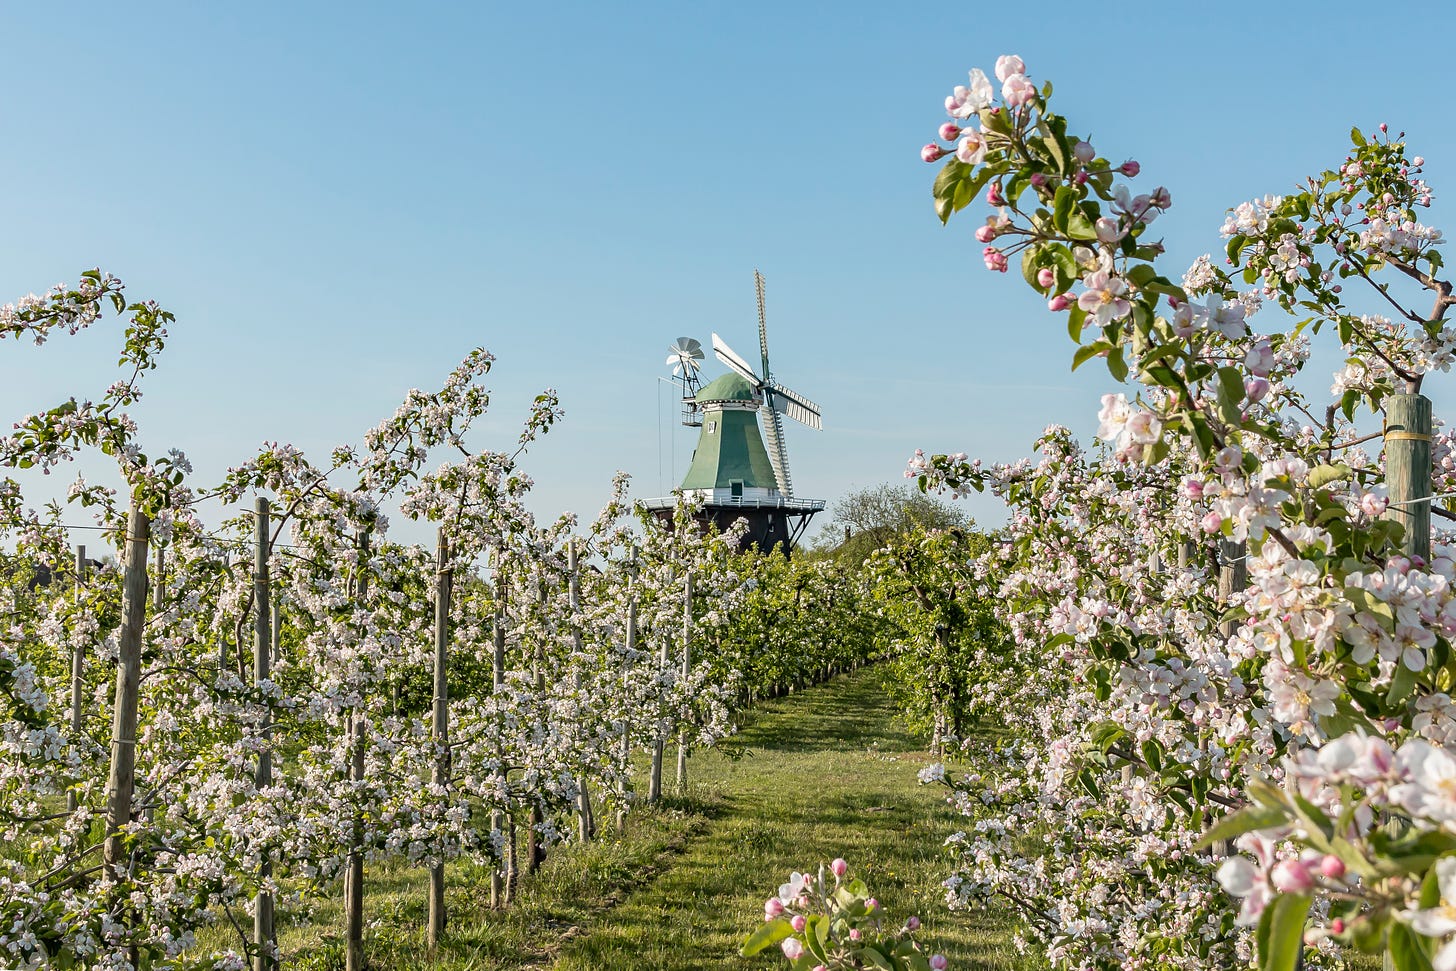 A pale green windmill surrounded by rows of apple and cherry trees in bloom